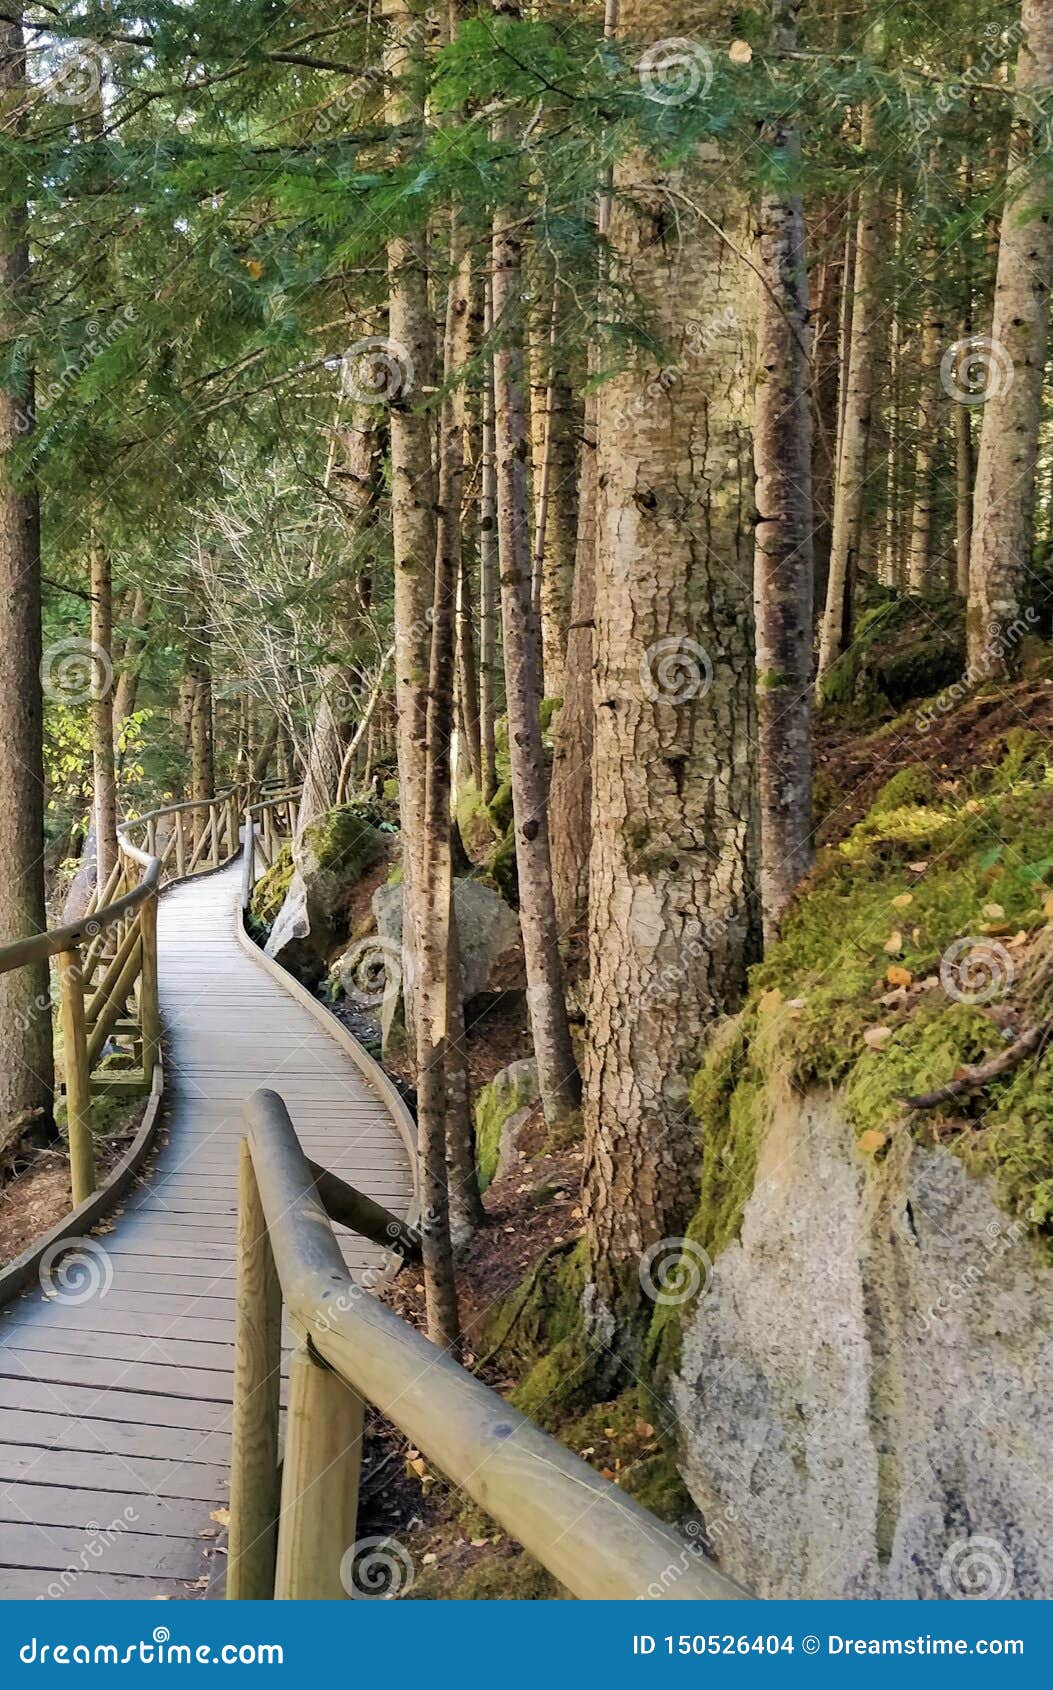 path of wooden planks among the forest